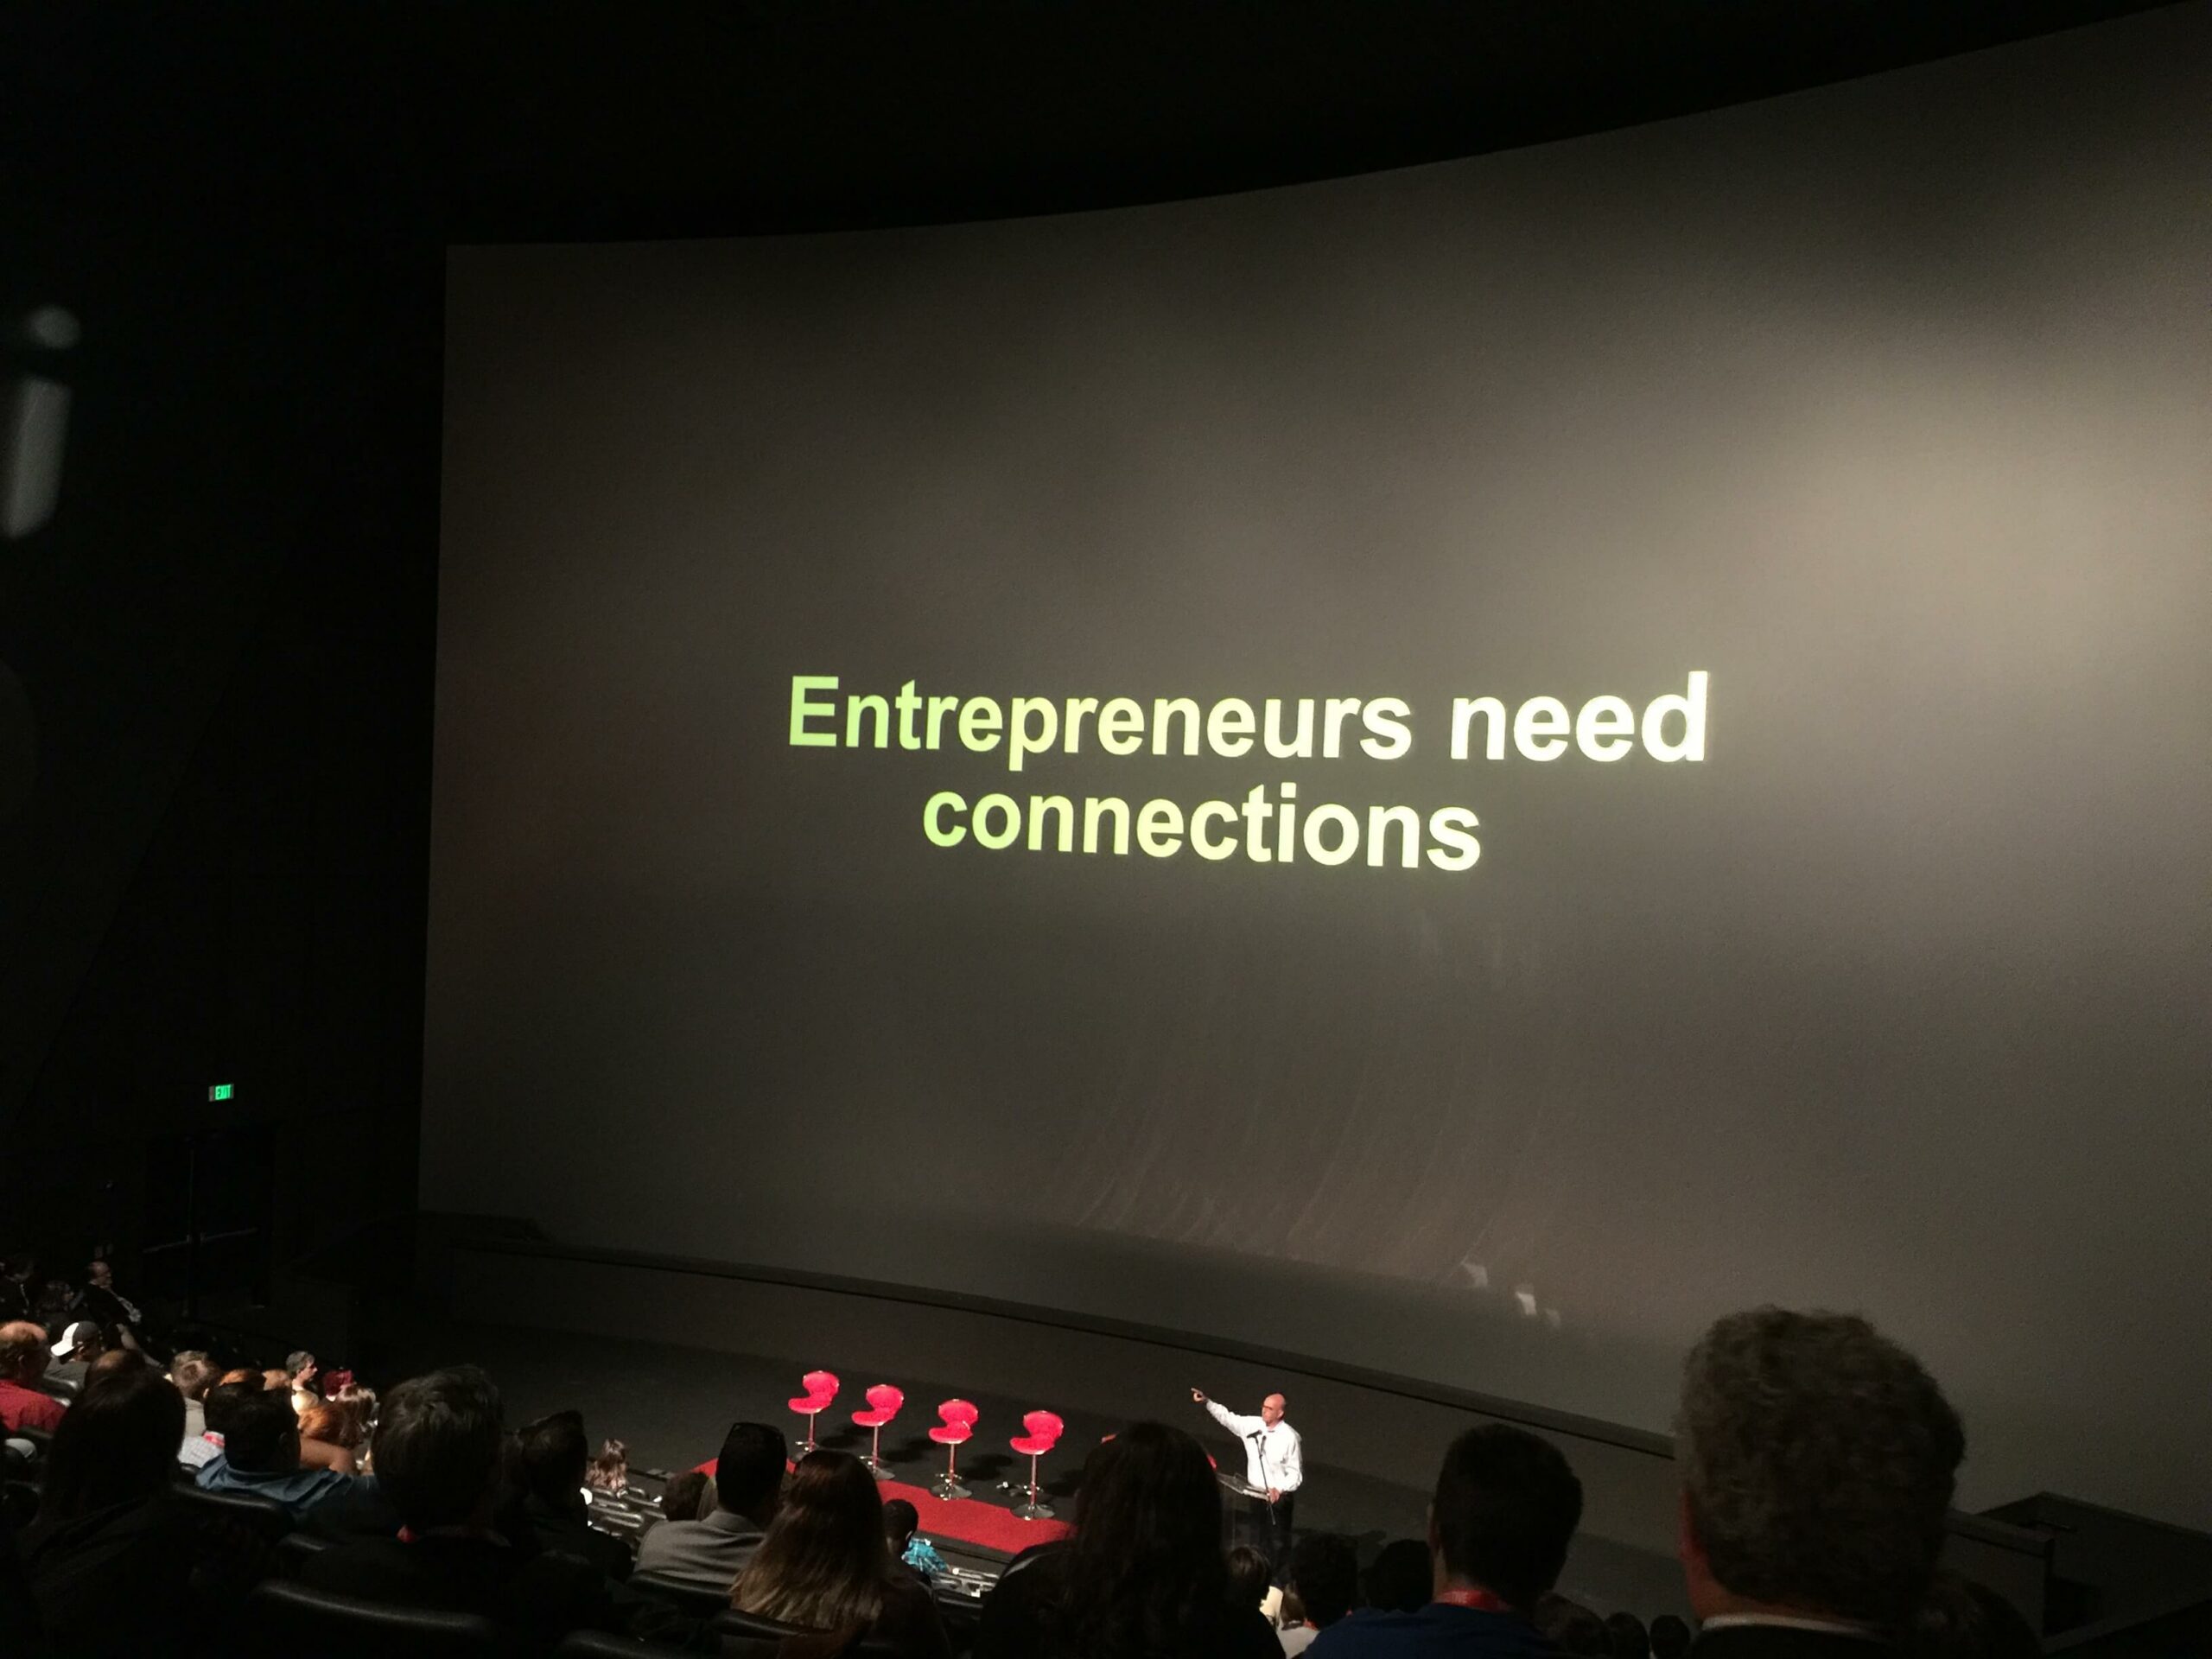 Roundup: From Connections to Entrepreneurial Community